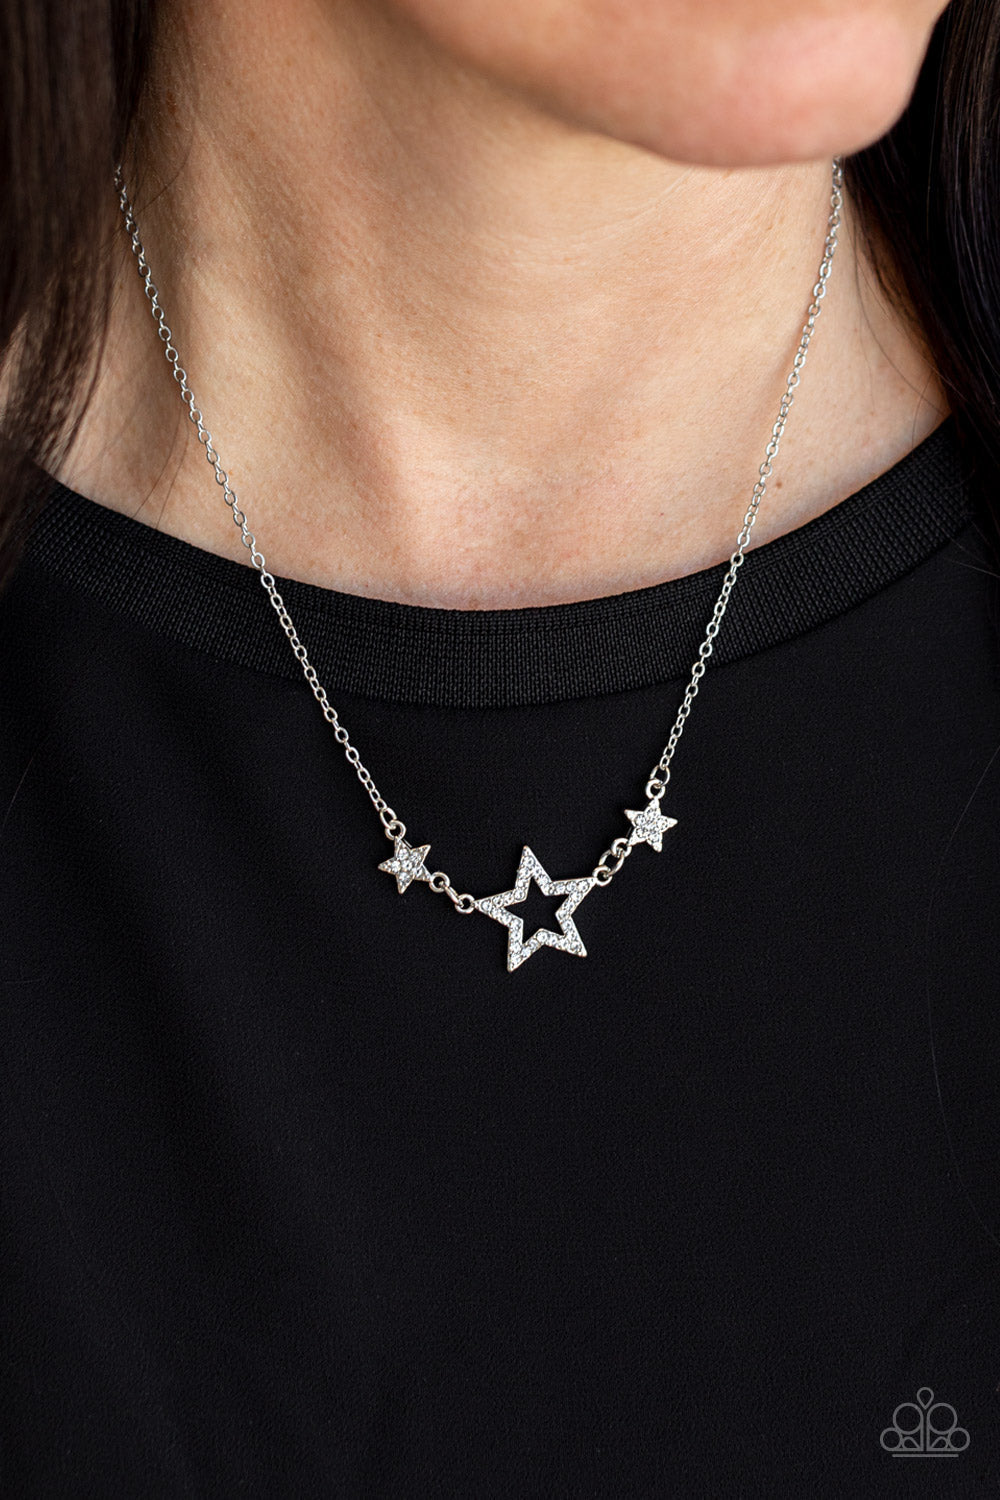 United We Sparkle Silver Patriotic Star Necklace - Paparazzi Accessories - A white rhinestone silver star is flanked by two dainty white rhinestone encrusted silver stars, creating a sparkly patriotic pendant below the collar fashion necklace.